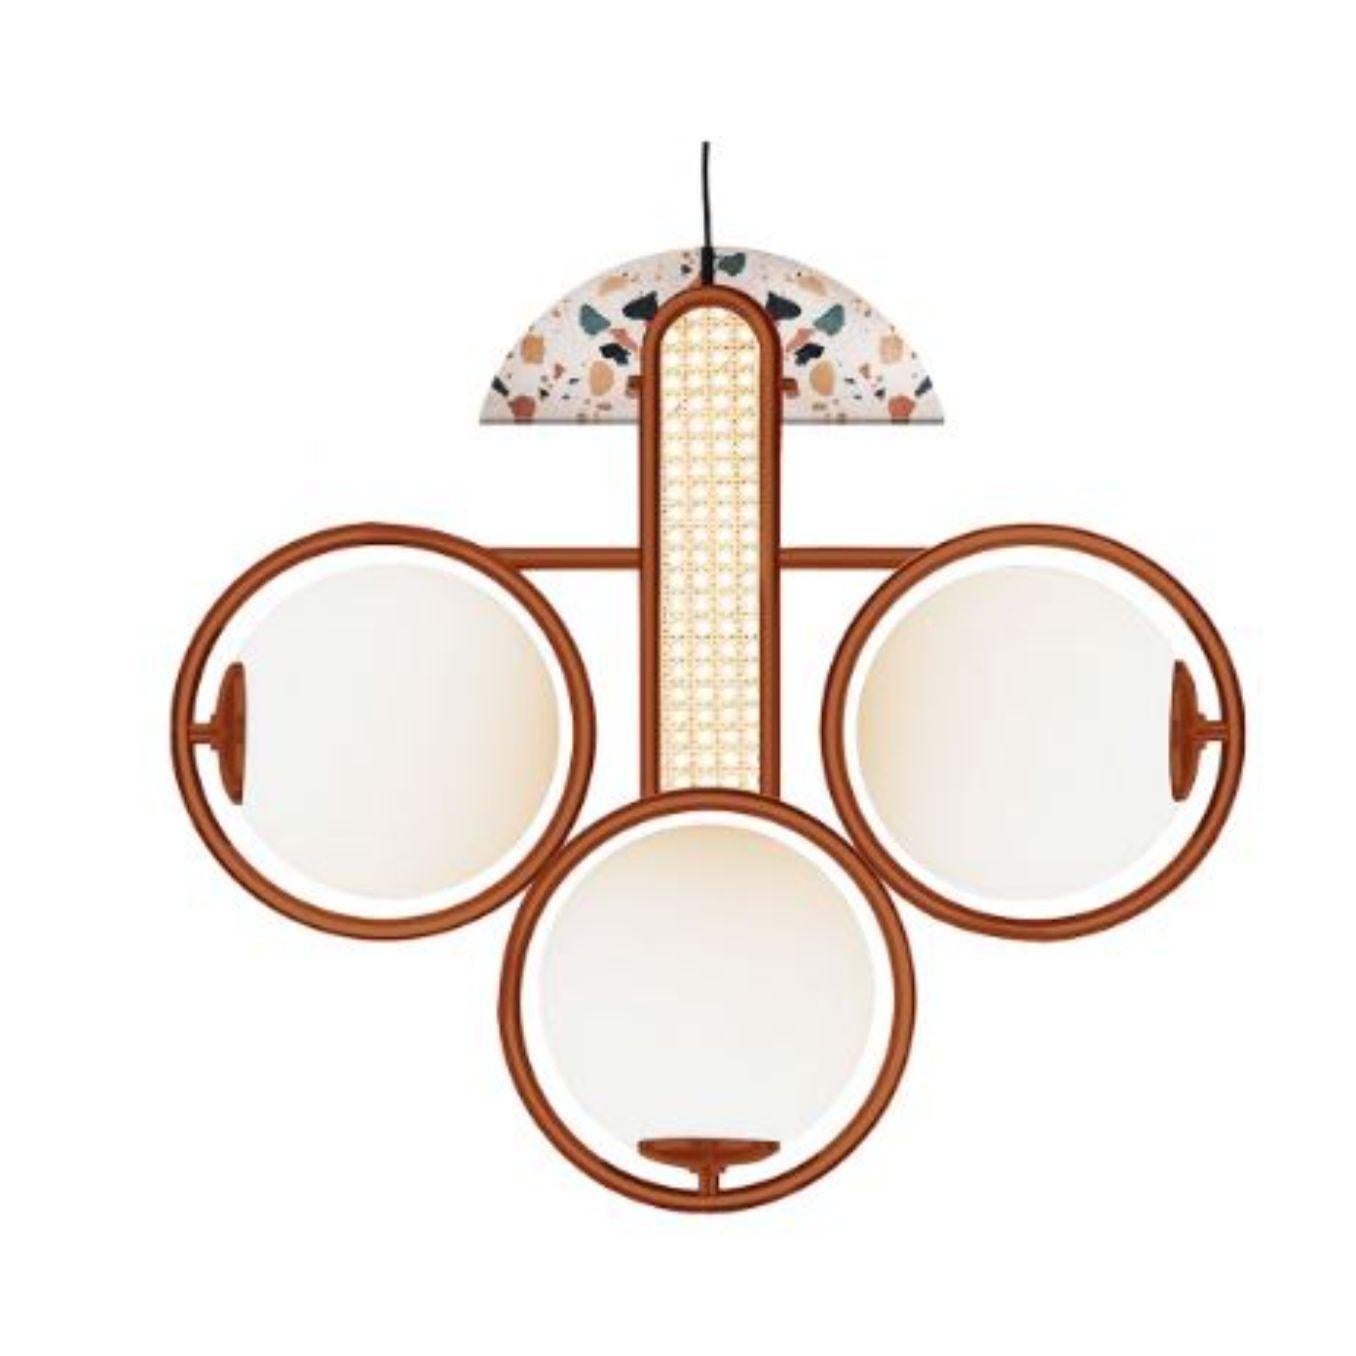 Frame I Suspension lamp by Dooq
Dimensions: W 70 x D 18 x H 50 cm
Materials: lacquered metal, rattan, terrazzo.

Information:
230V/50Hz
3 x max. G9
4W LED

120V/60Hz
3 x max. G9
4W LED

Cable: 59”/1,5m

All our lamps can be wired according to each